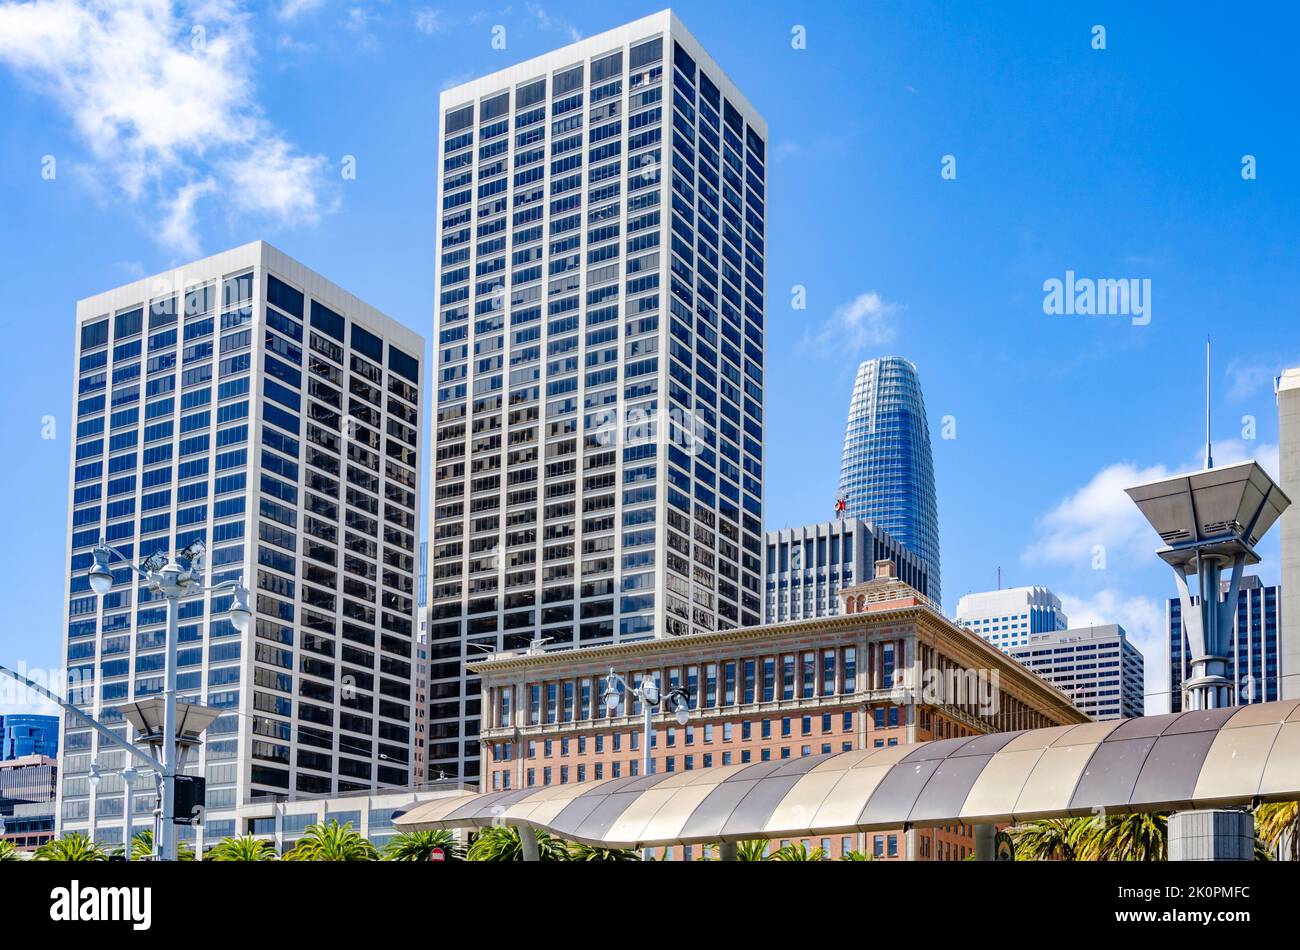 One market Plaza dominates the skyline seen against a blue sky. Stock Photo